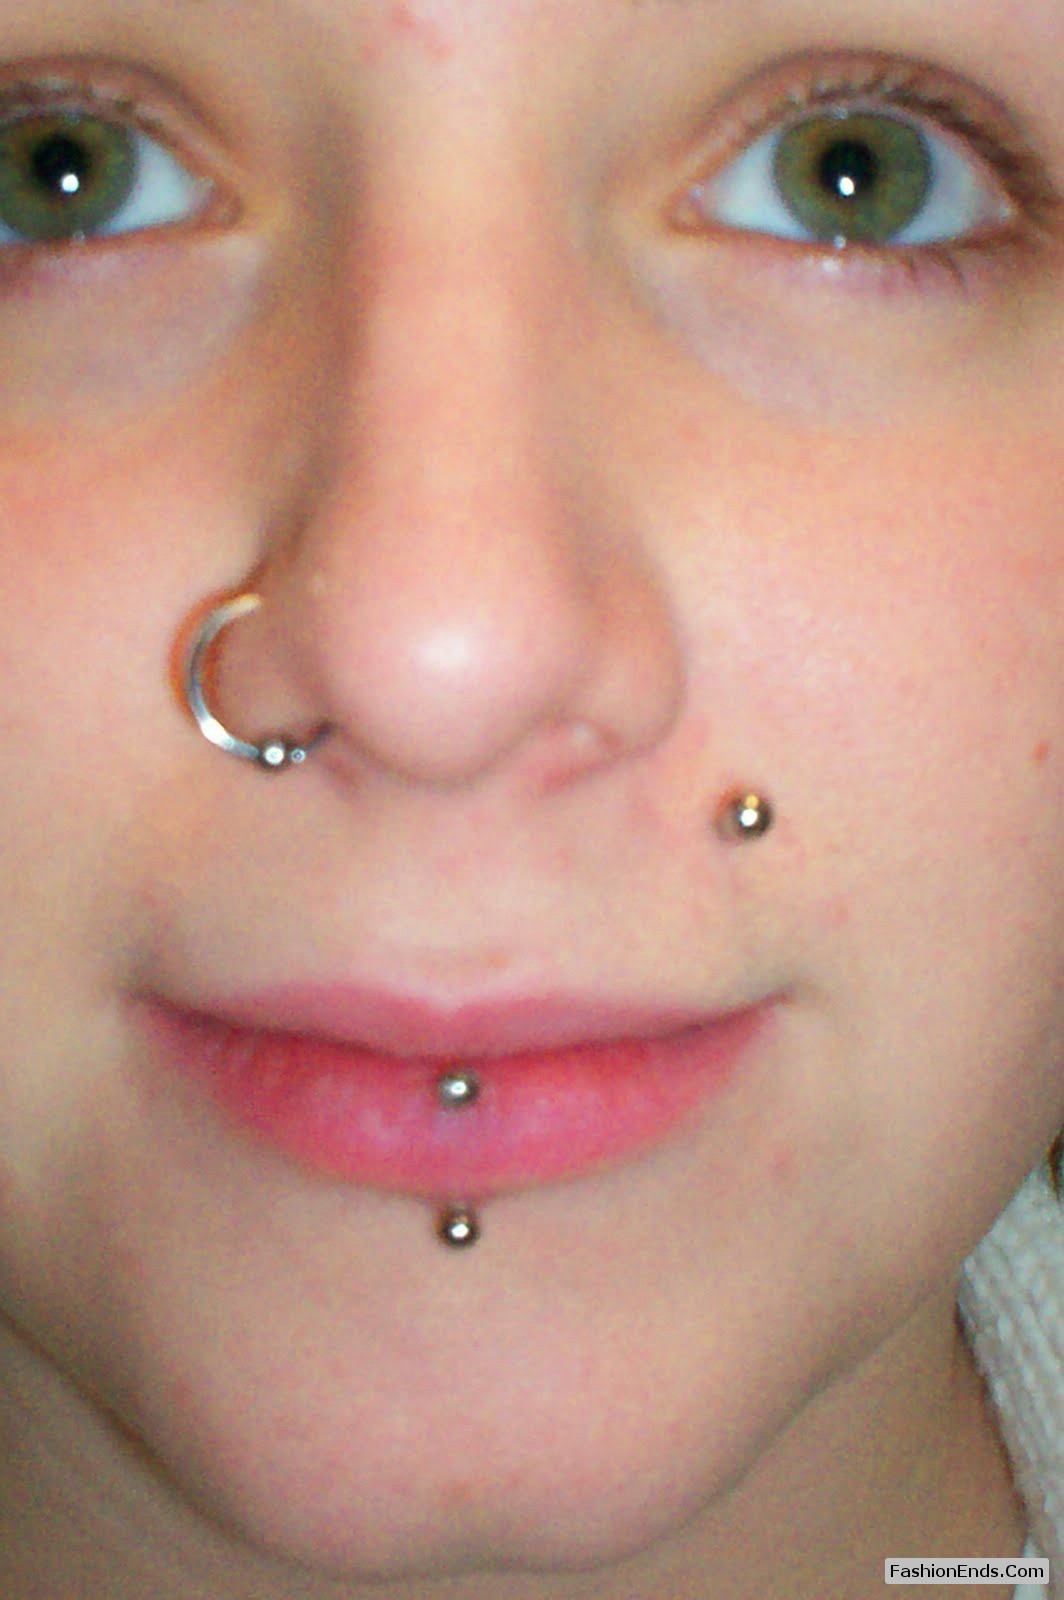 Right Nostril And Vertical Lip Face Piercing For Girls